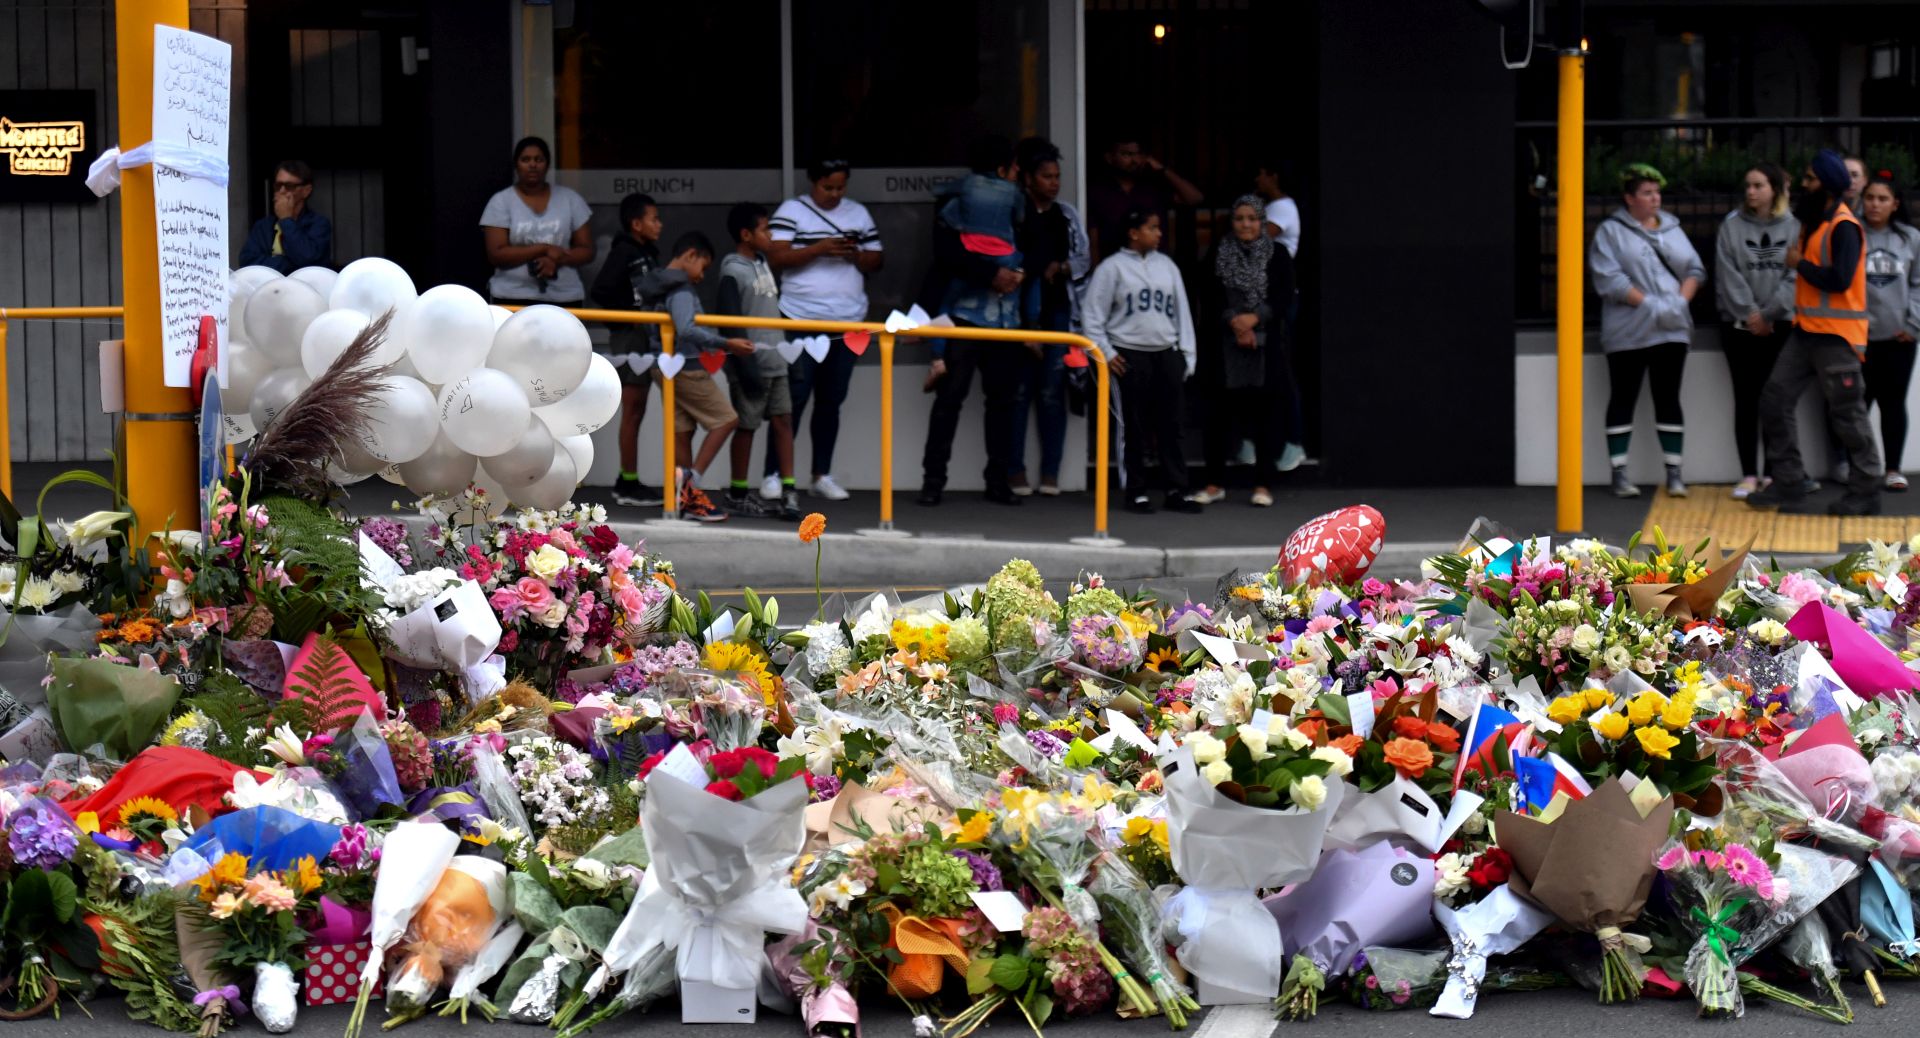 epa07441310 A makeshift memorial near the Al Noor Masjid on Deans Rd in Christchurch, New Zealand, 16 March 2019. A gunman killed 49 worshippers at the Al Noor Masjid and Linwood Masjid on 15 March. The 28-year-old Australian suspect, Brenton Tarrant, appeared in court on 16 March and was charged with murder.  EPA/MICK TSIKAS  AUSTRALIA AND NEW ZEALAND OUT